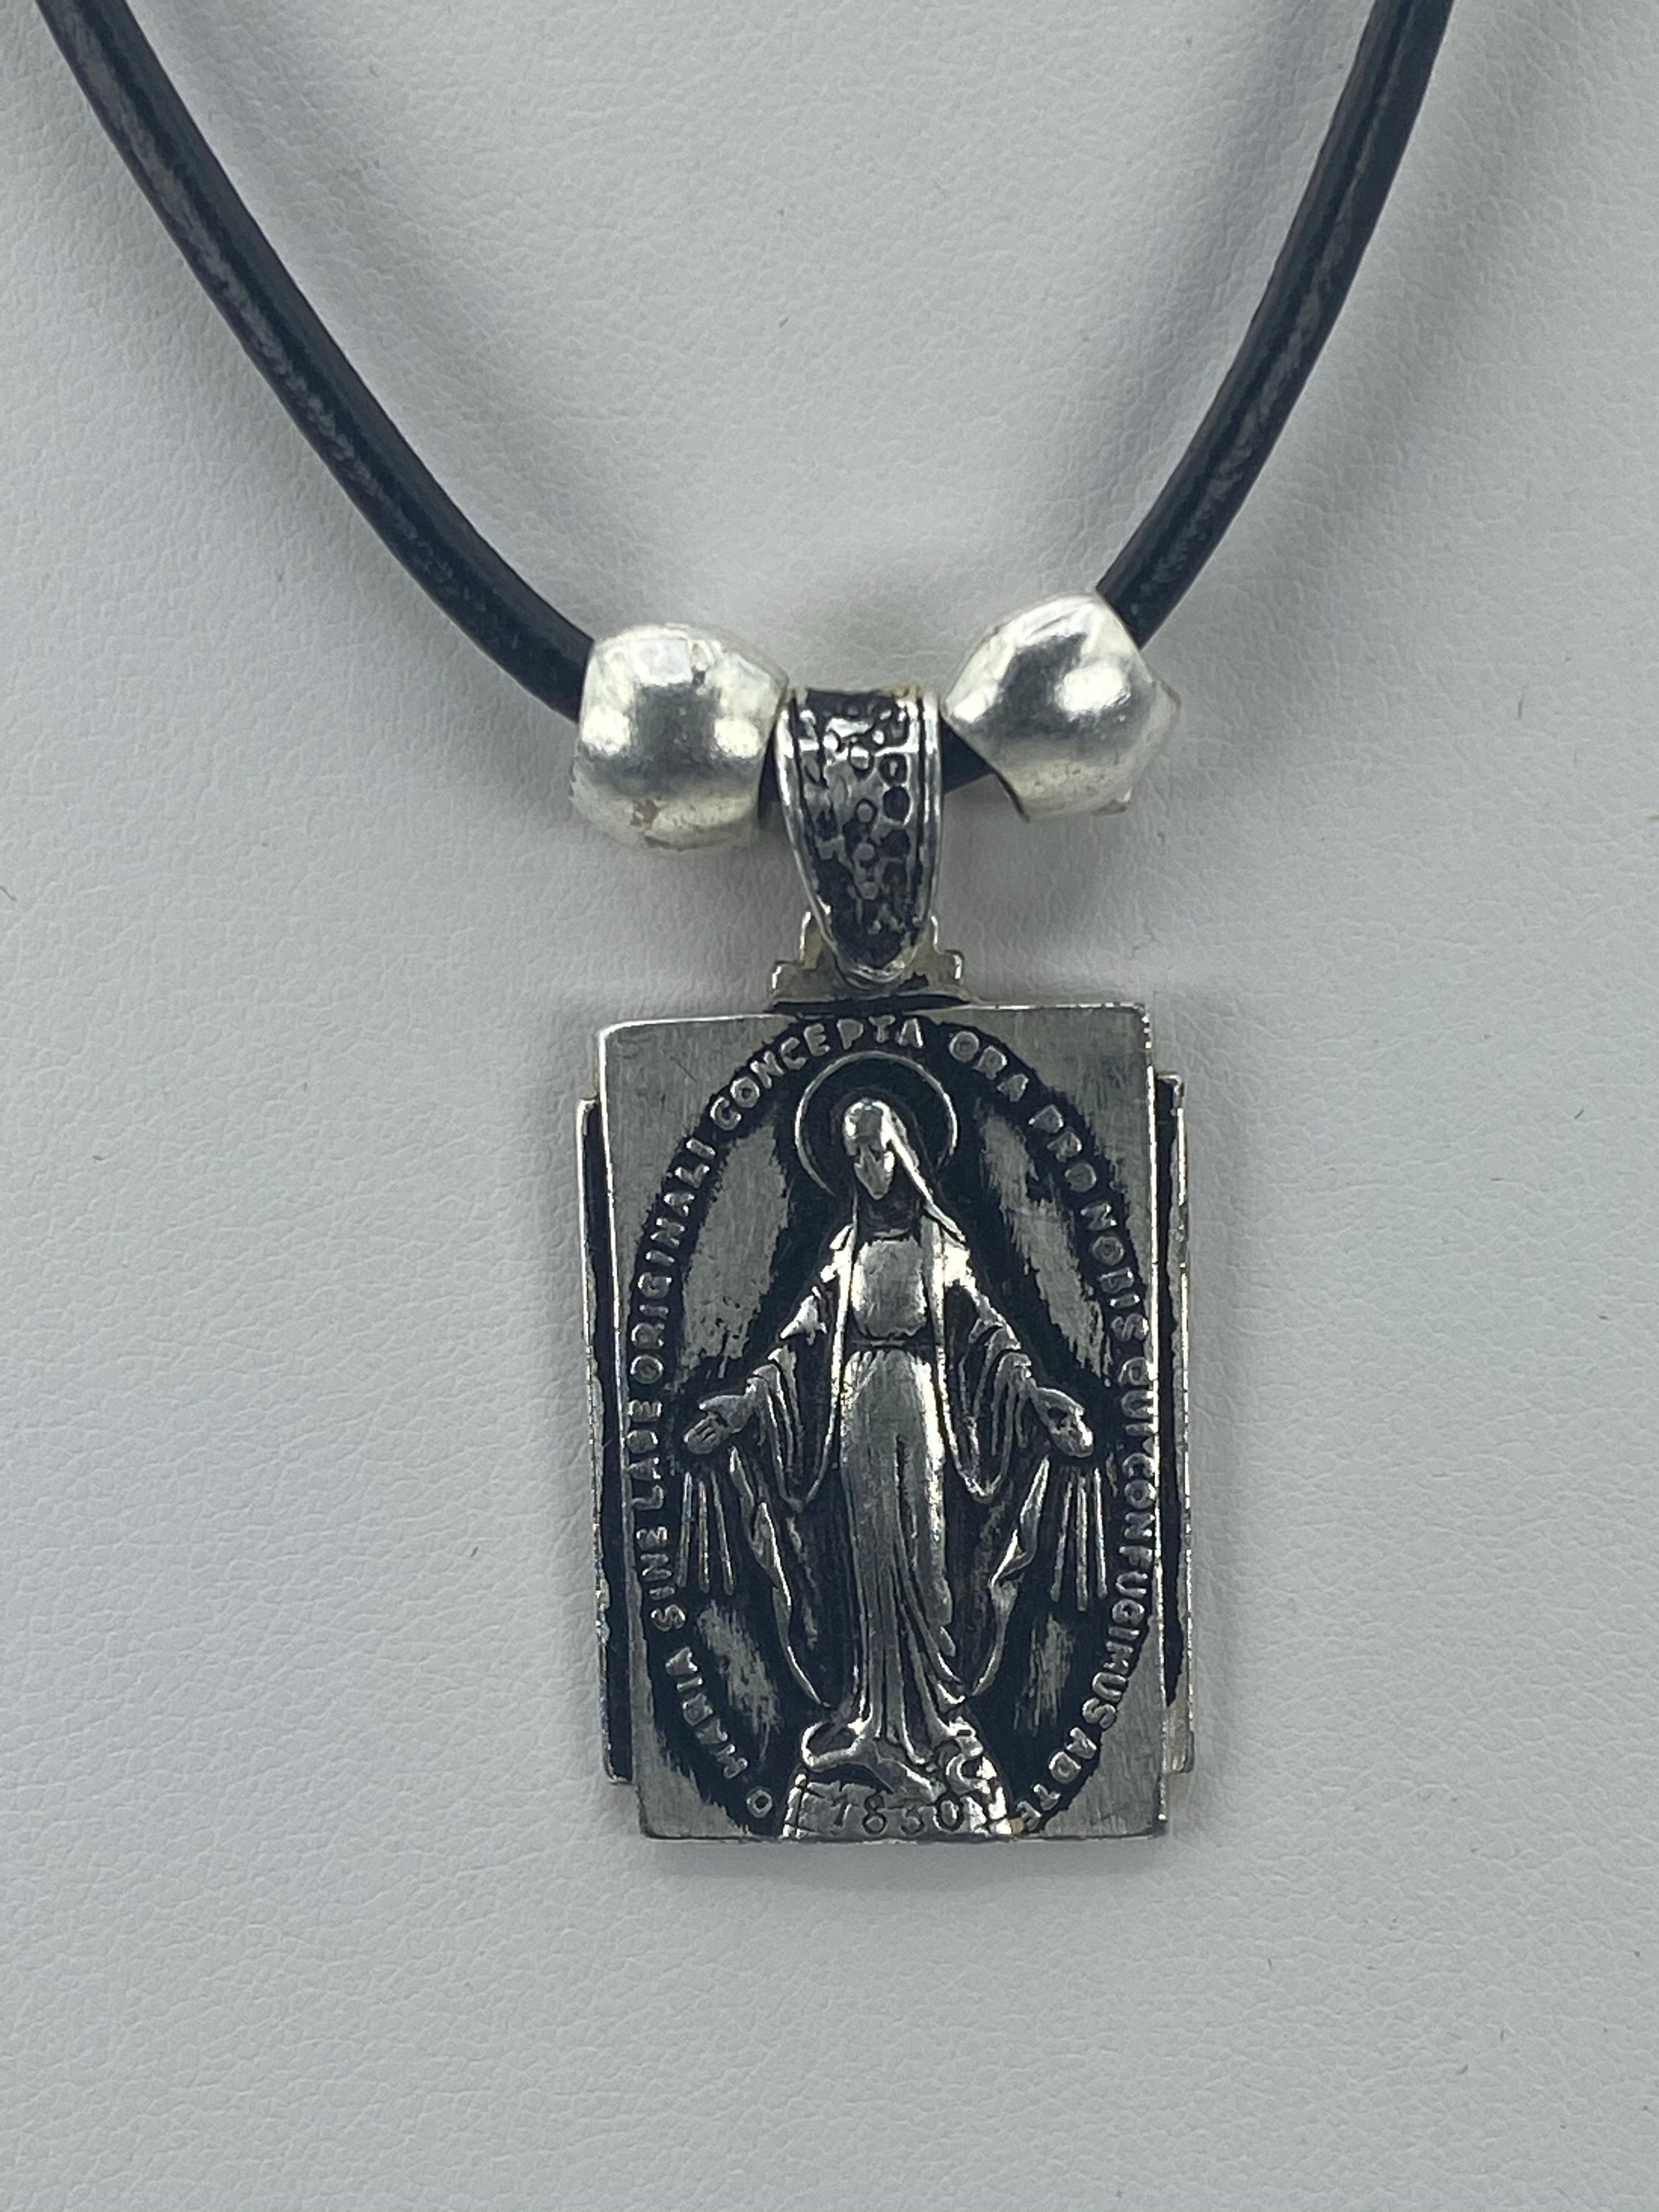 Vintage Necklace Miraculous Virgen Mary Handmade Jewelry with Genuine Leather strap by Graciela's Collection